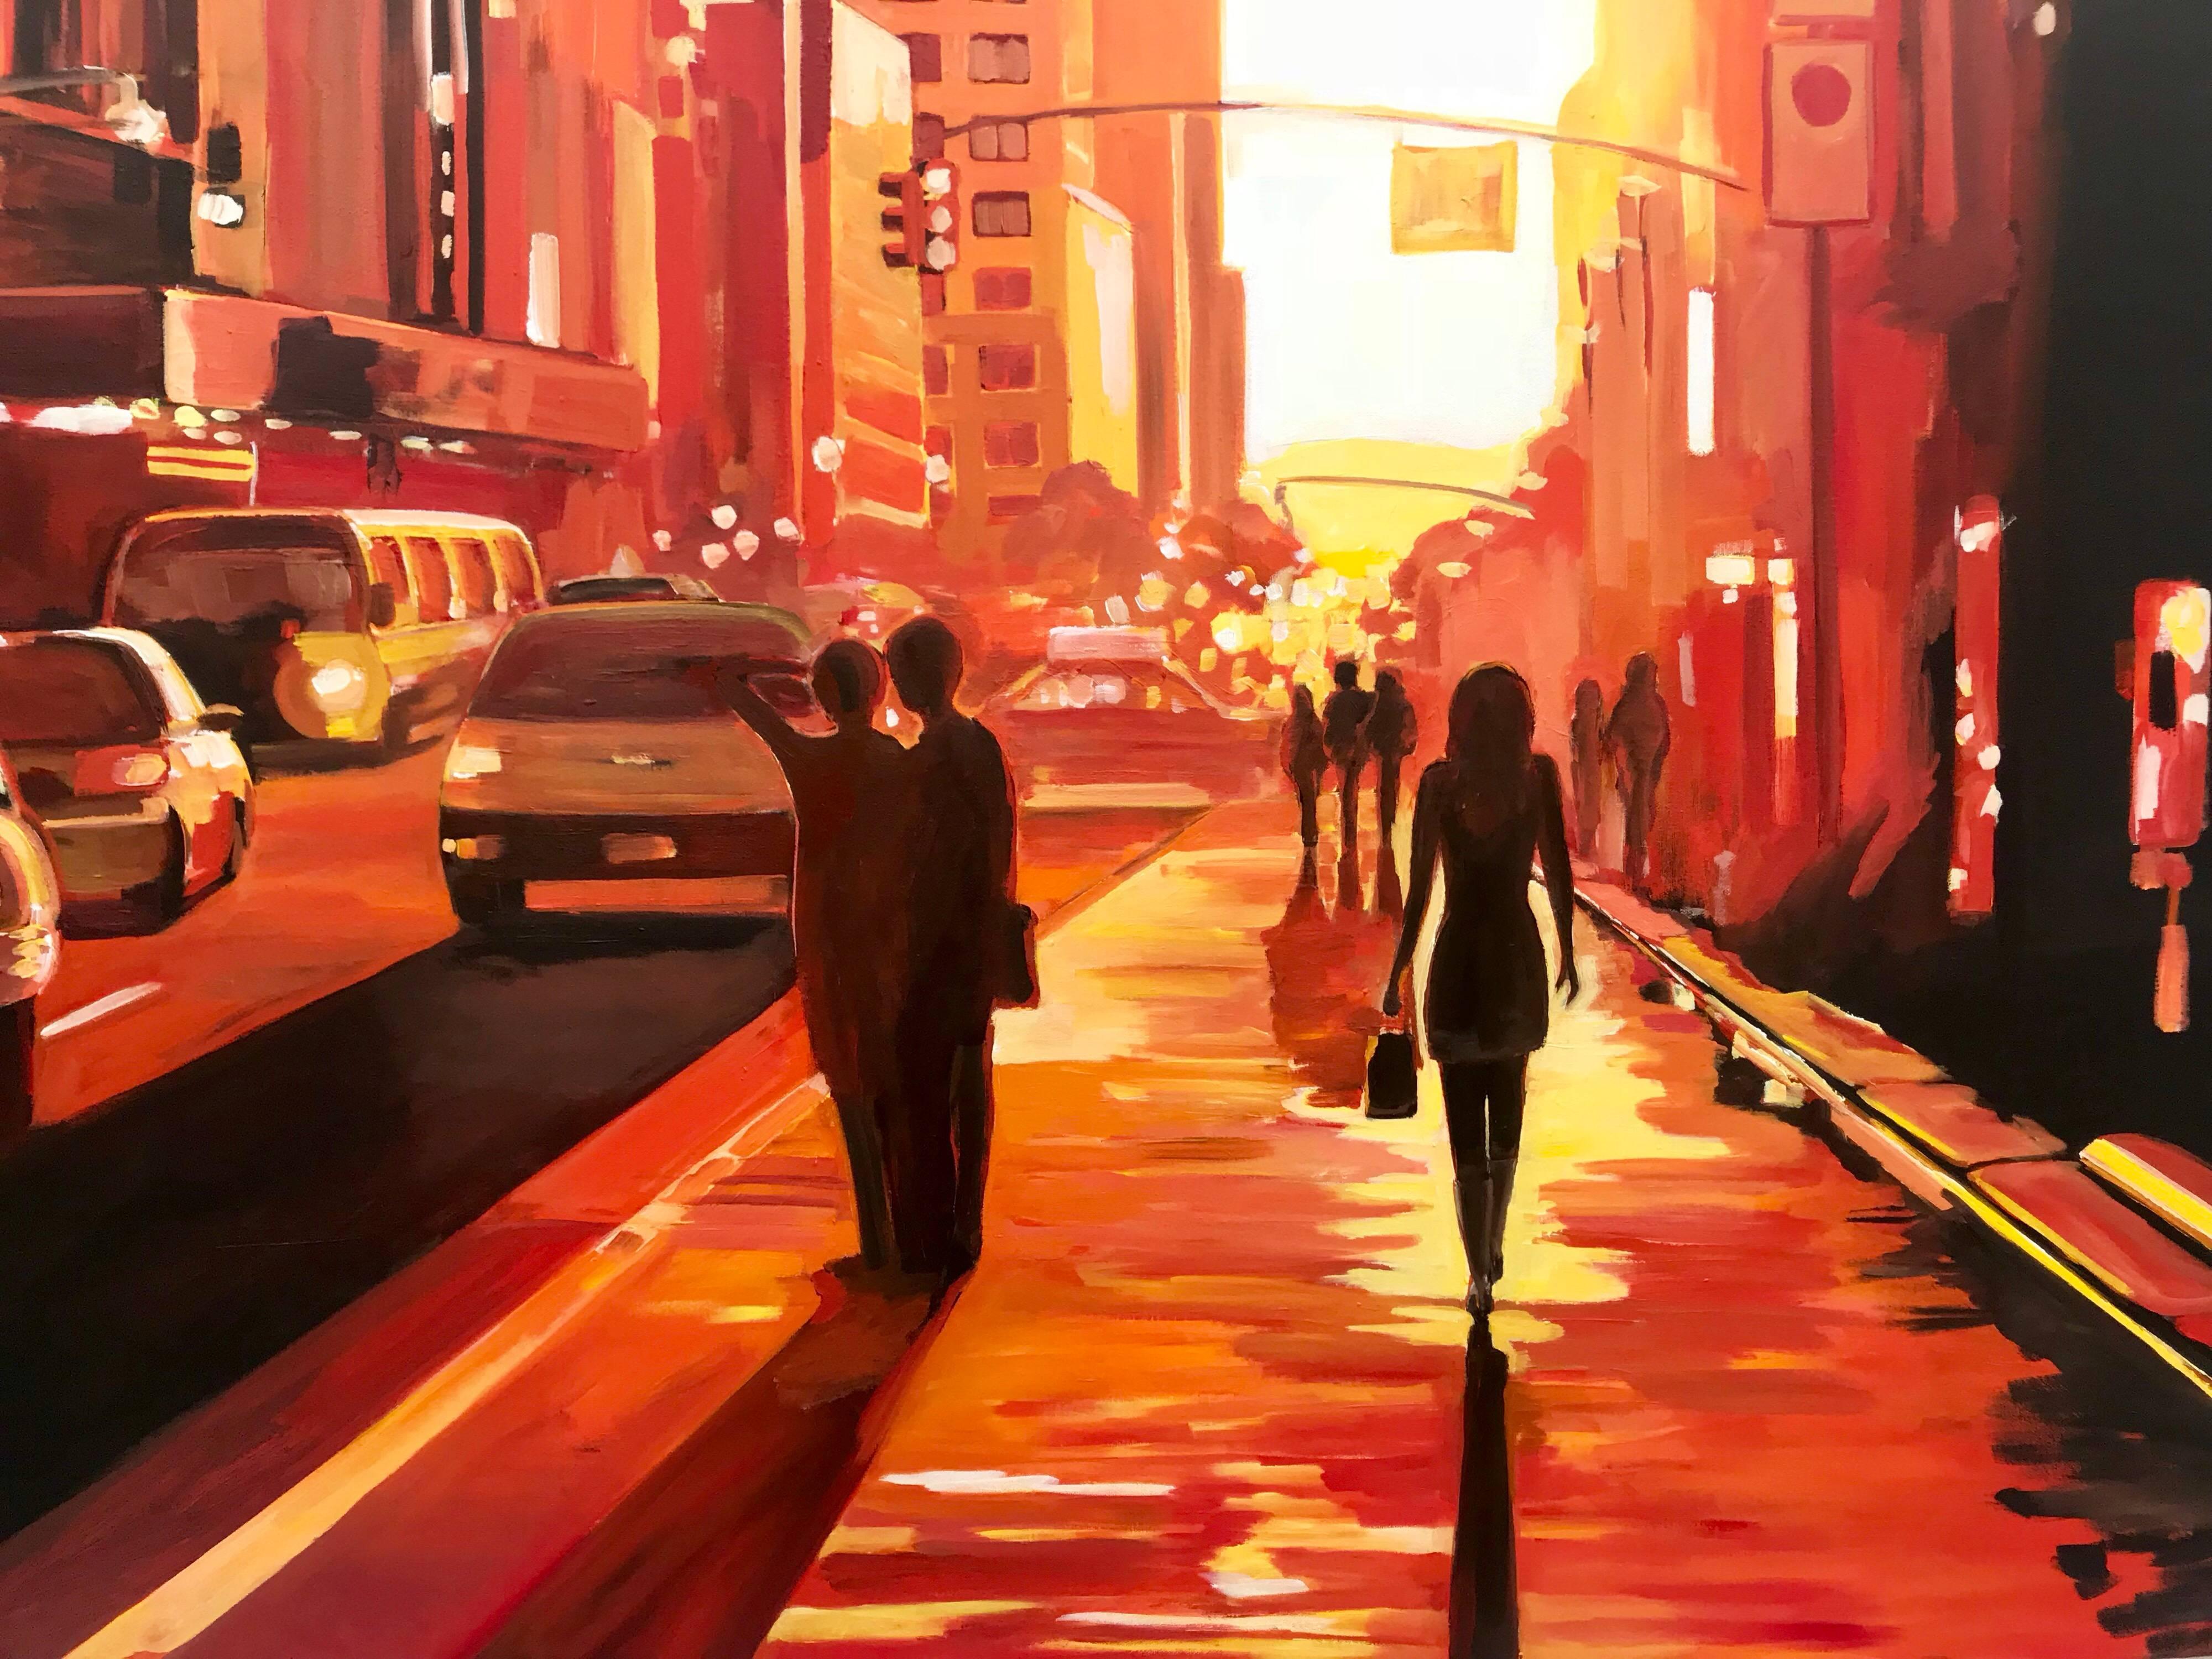 New York Sunshine Figurative Cityscape Limited Edition Print of 'New York Woman' - Cityscape Painting by Leading British Urban Landscape Artist. 'New York Woman' illustrates Angela Wakefield's ability to capture the behaviour of light within the